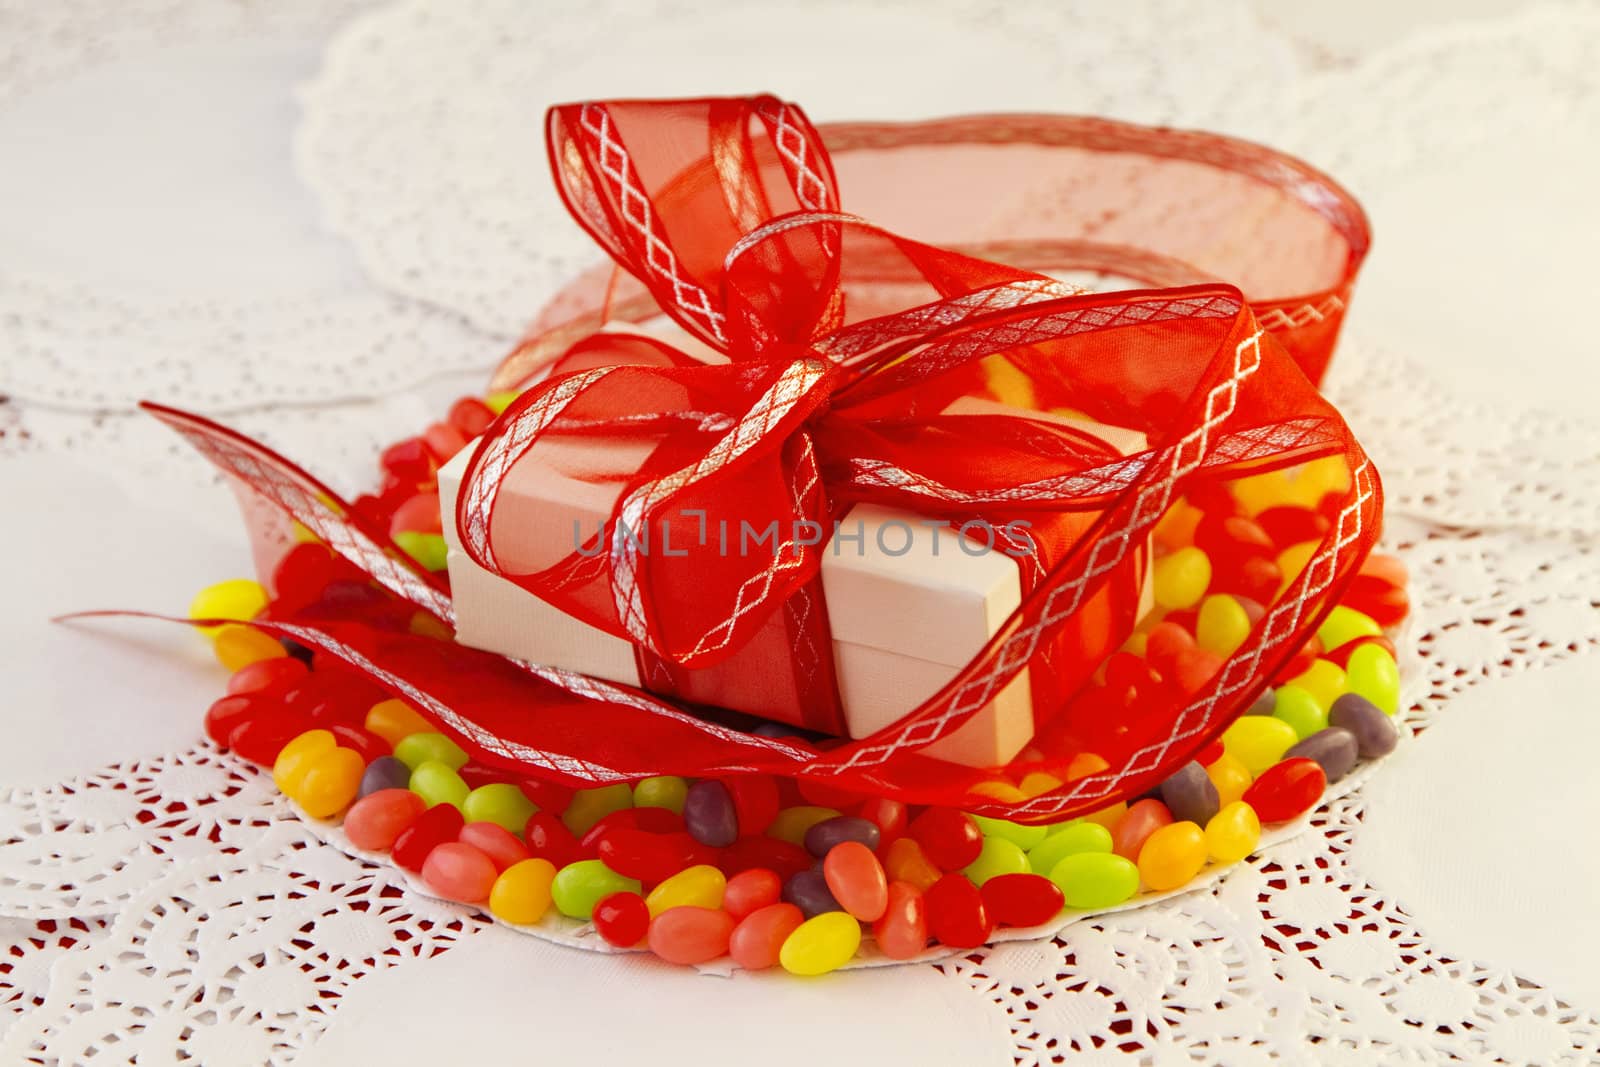 White package wrapped in red ribbon placed on colorful jellybeans and paper doilies